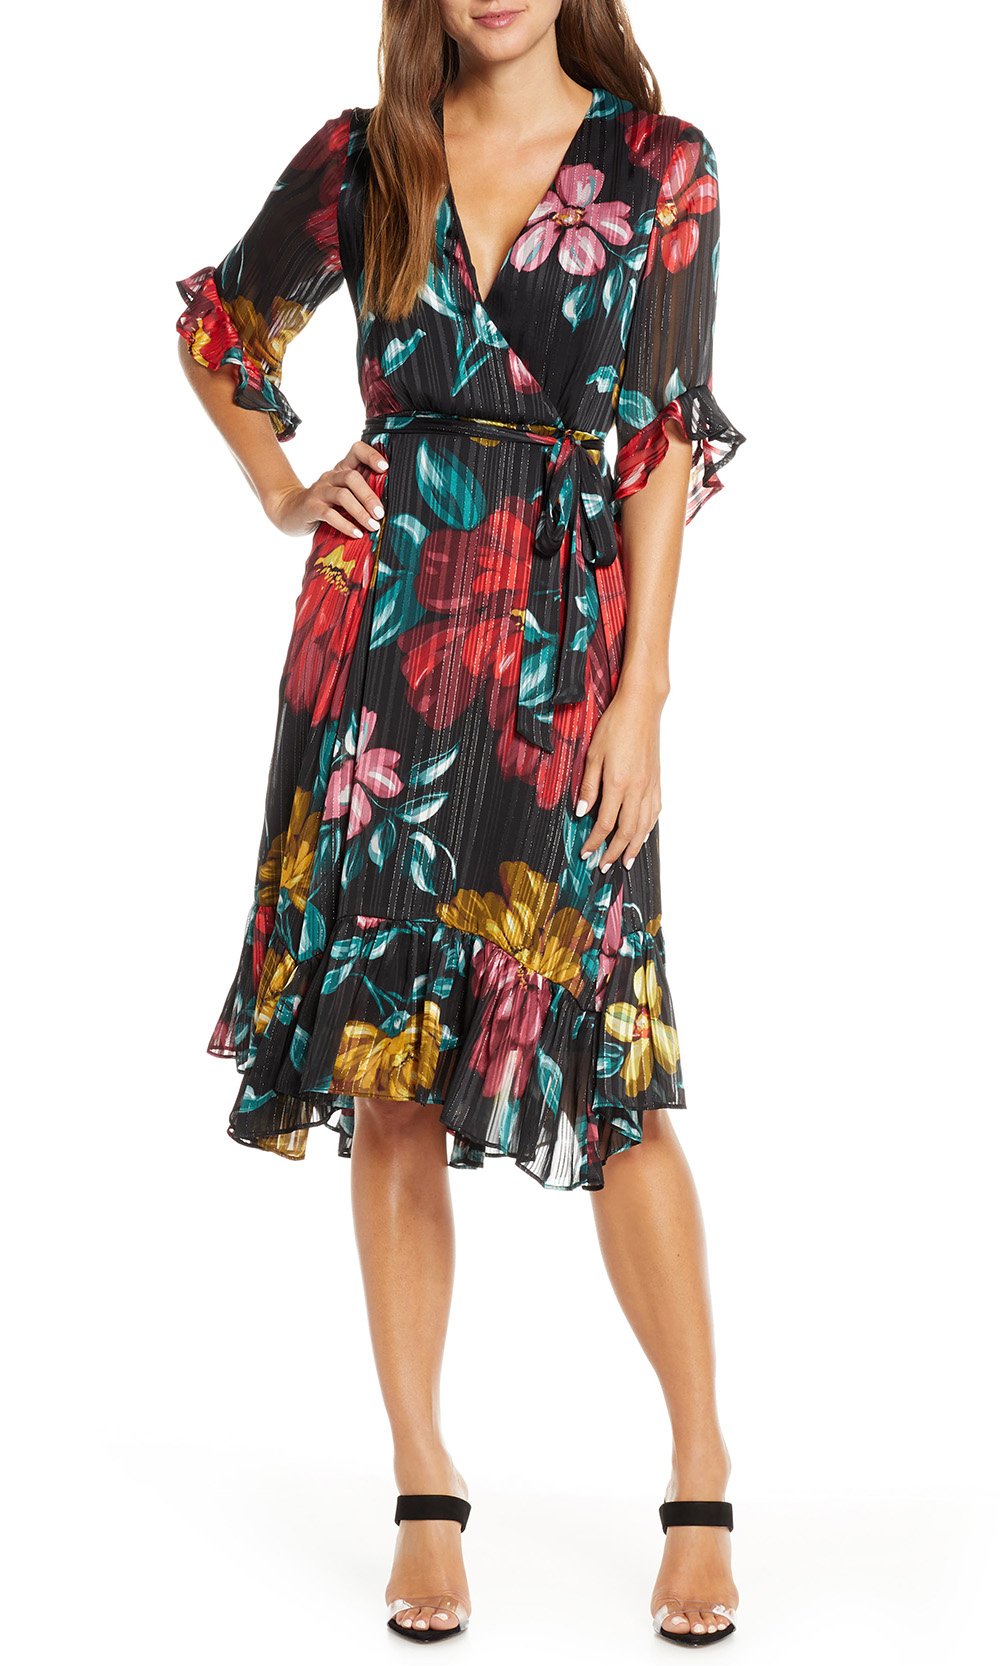 Maison Tara - 91125M Tea Length Floral Metallic Wrap Style Dress In Floral and Multi-Color